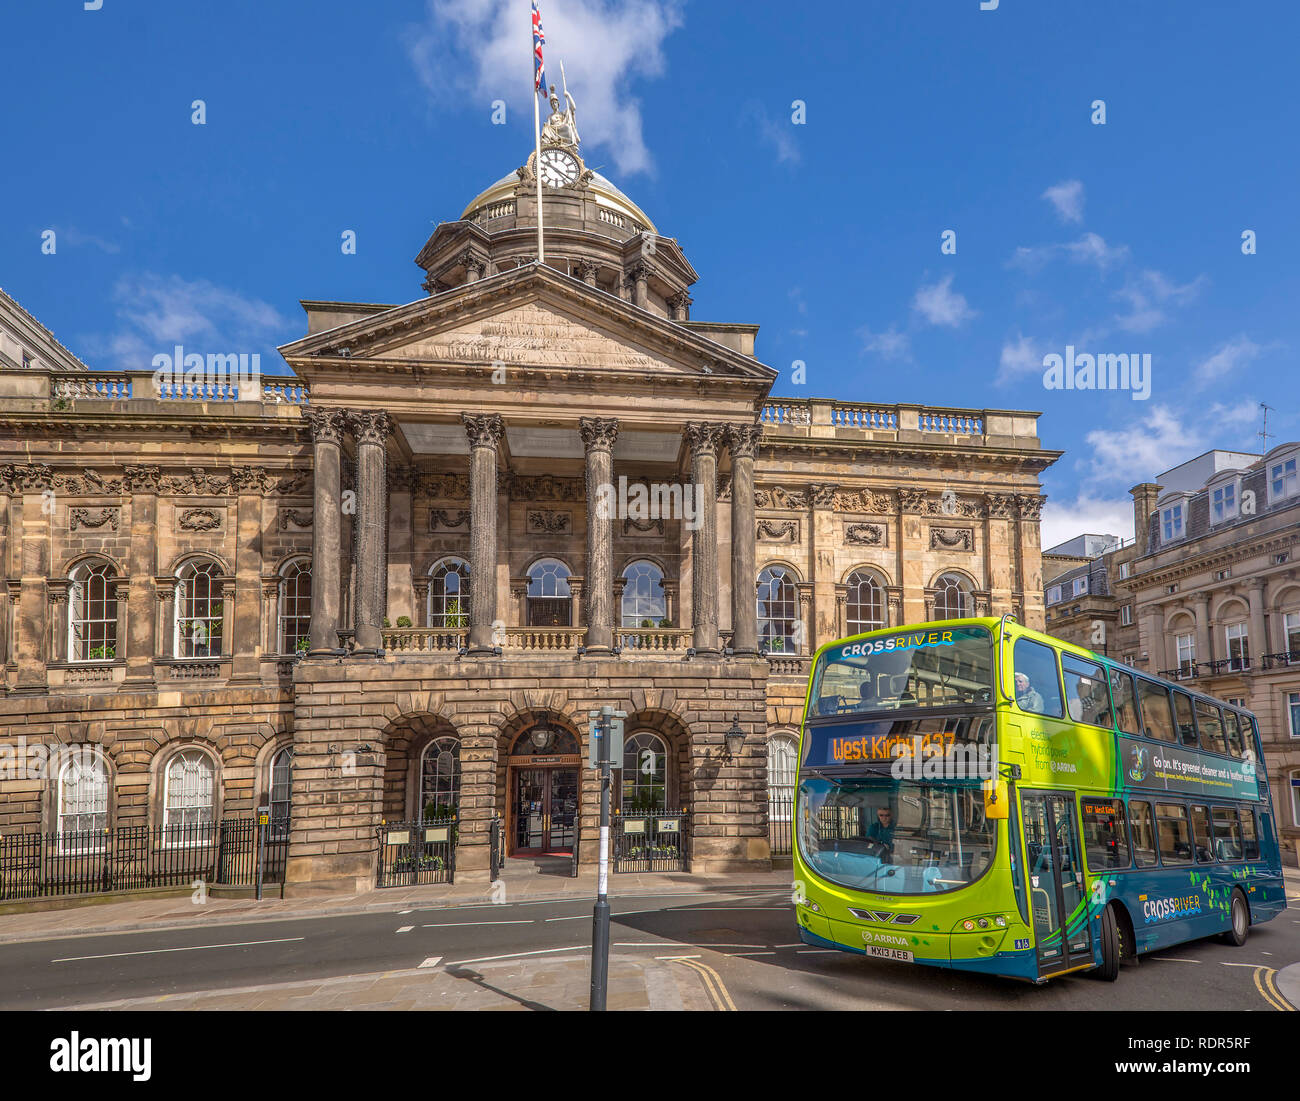 Arriva Crossriver Hybrid double decker bus infront of the Liverpool Town Hall turning into Castle Street. Stock Photo